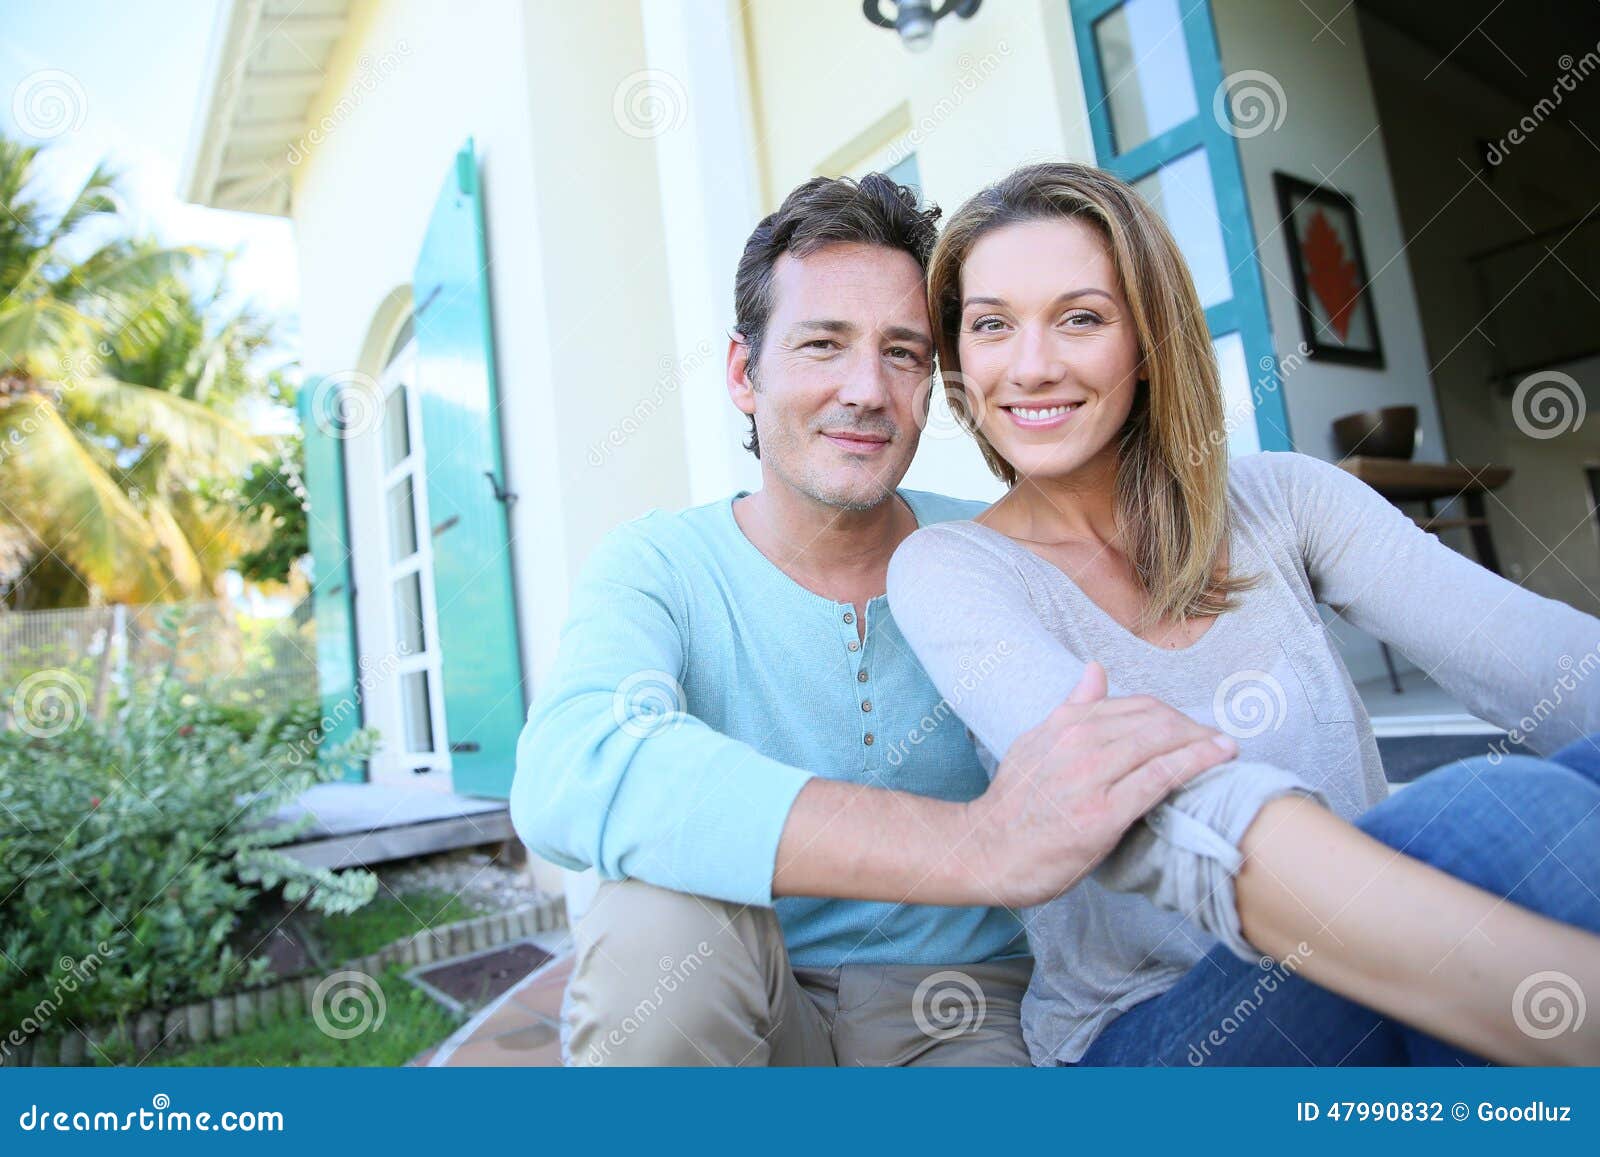 middle-aged couple sitting in the garden